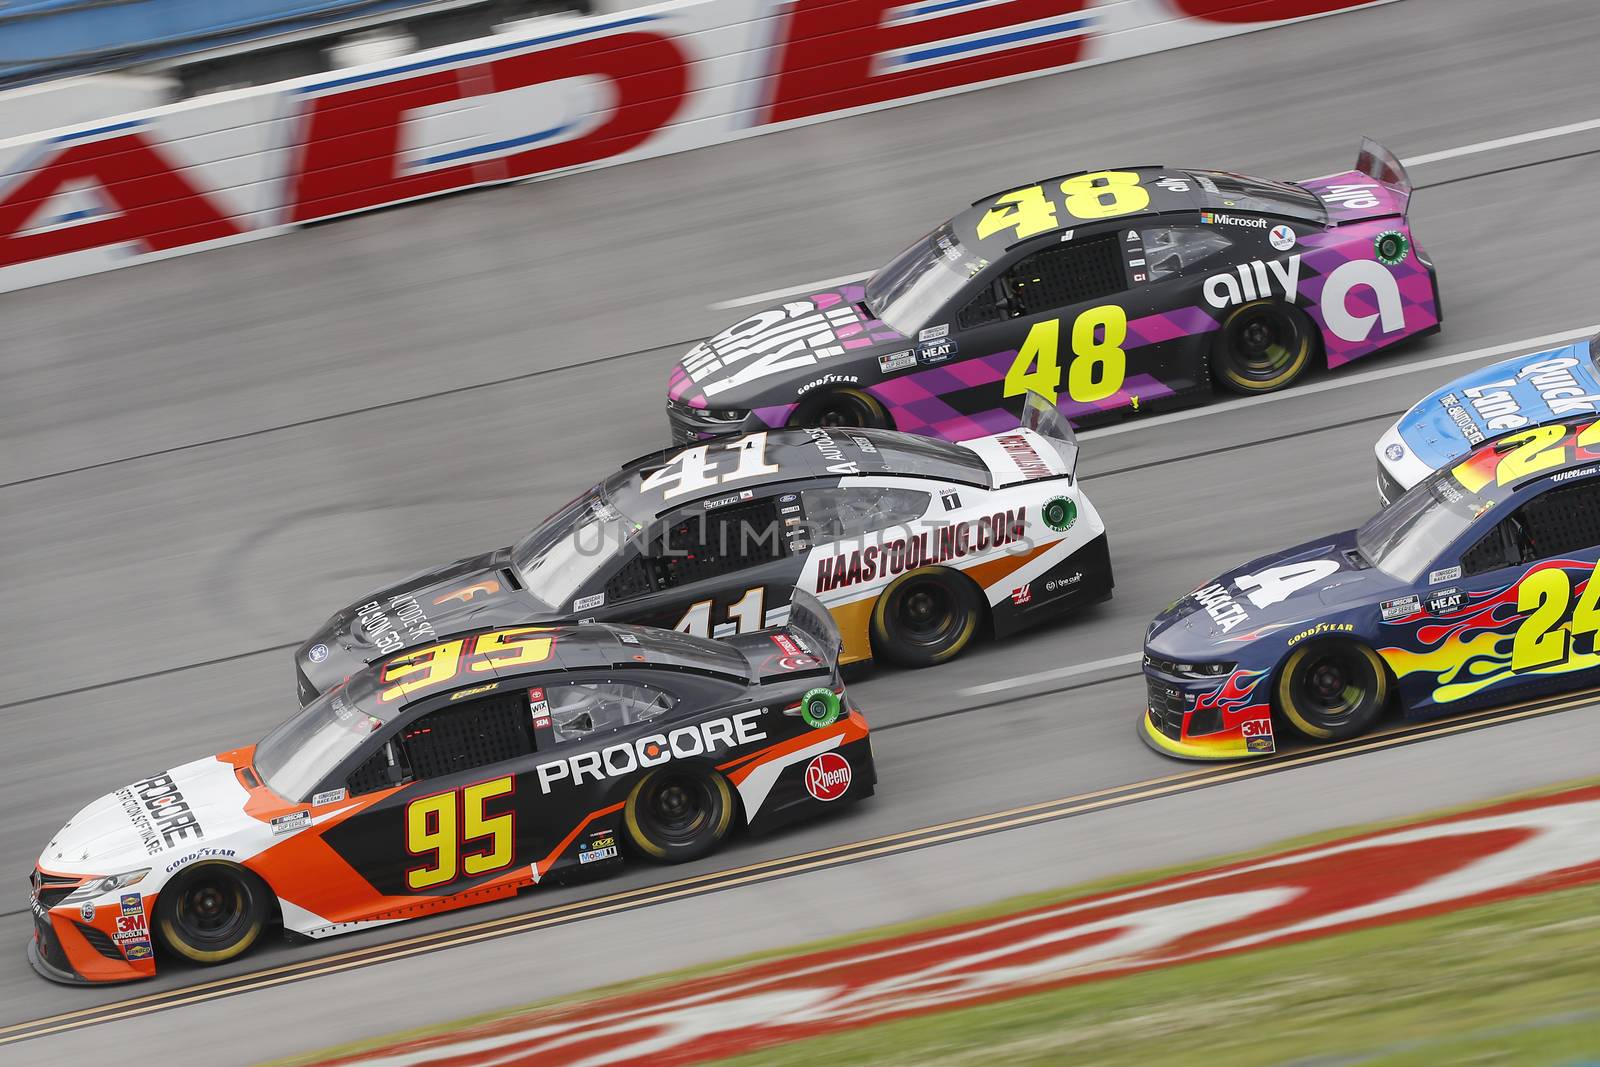 NASCAR: June 22 GEICO 500 by actionsports